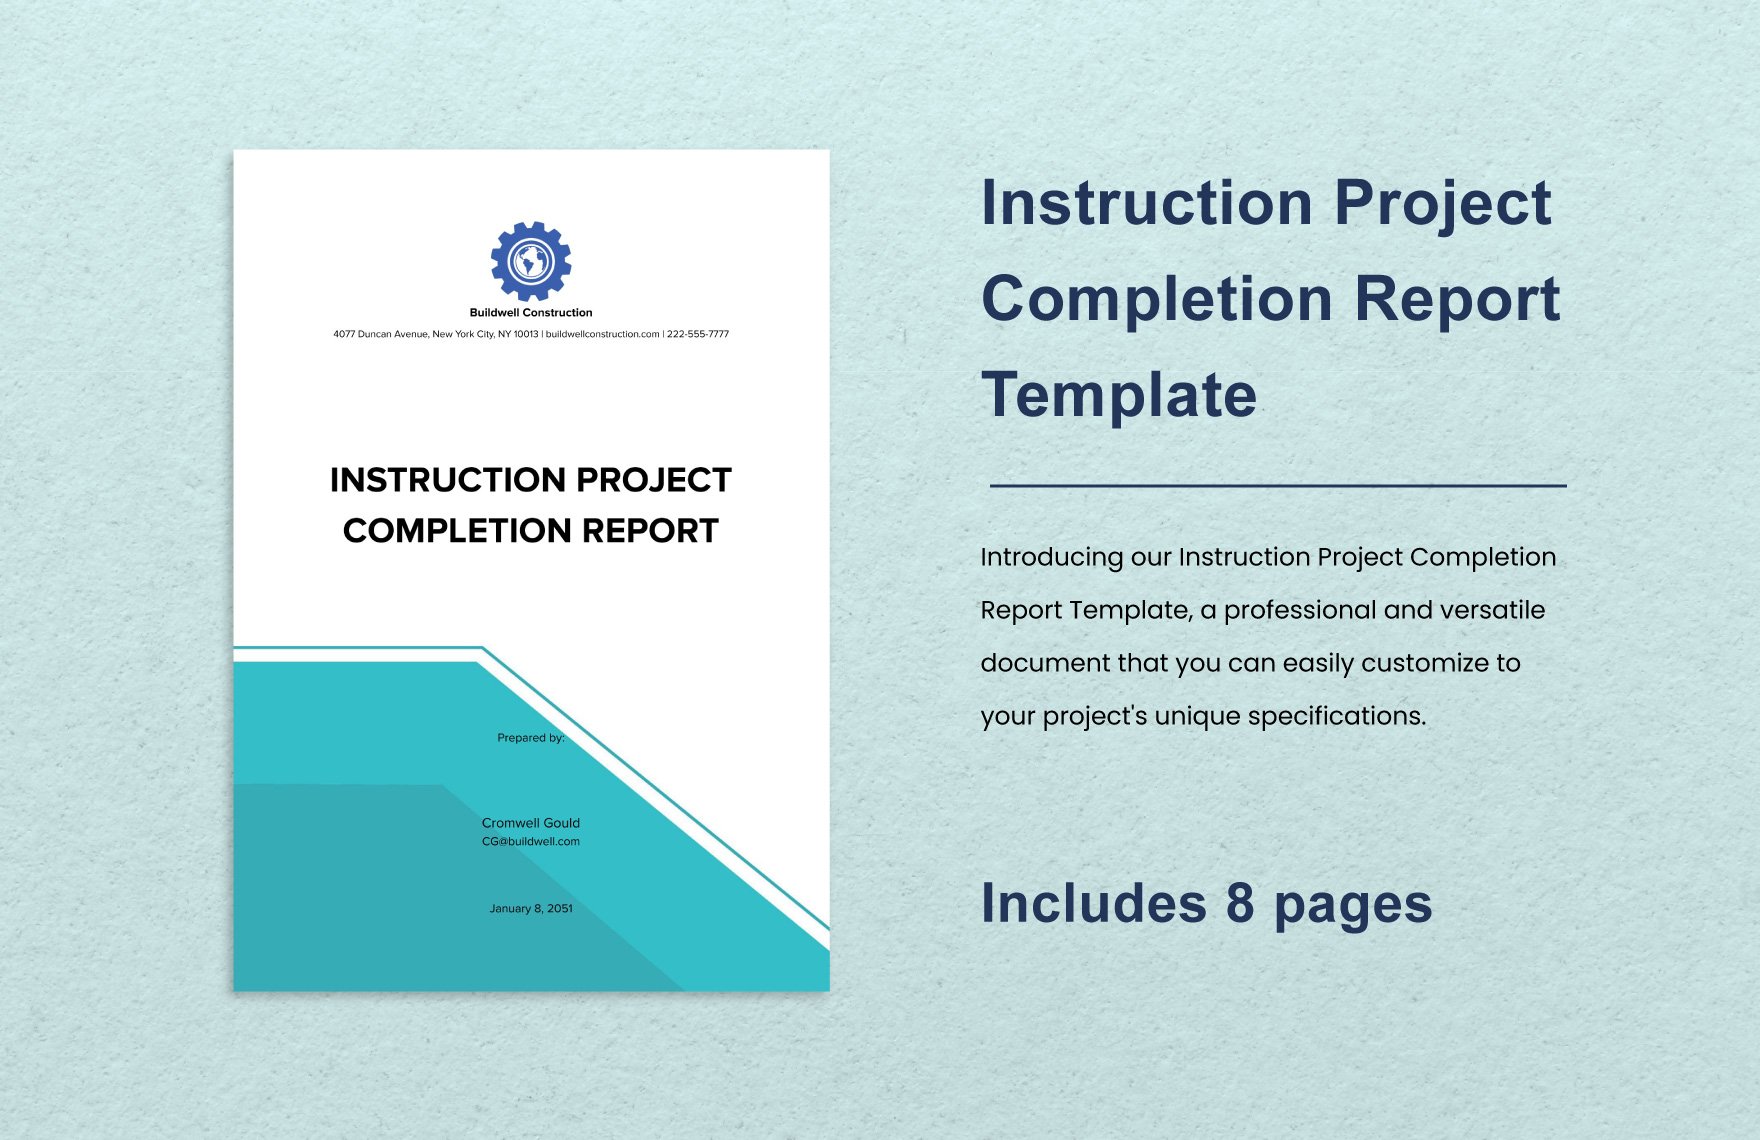 Instruction Project Completion Report Template